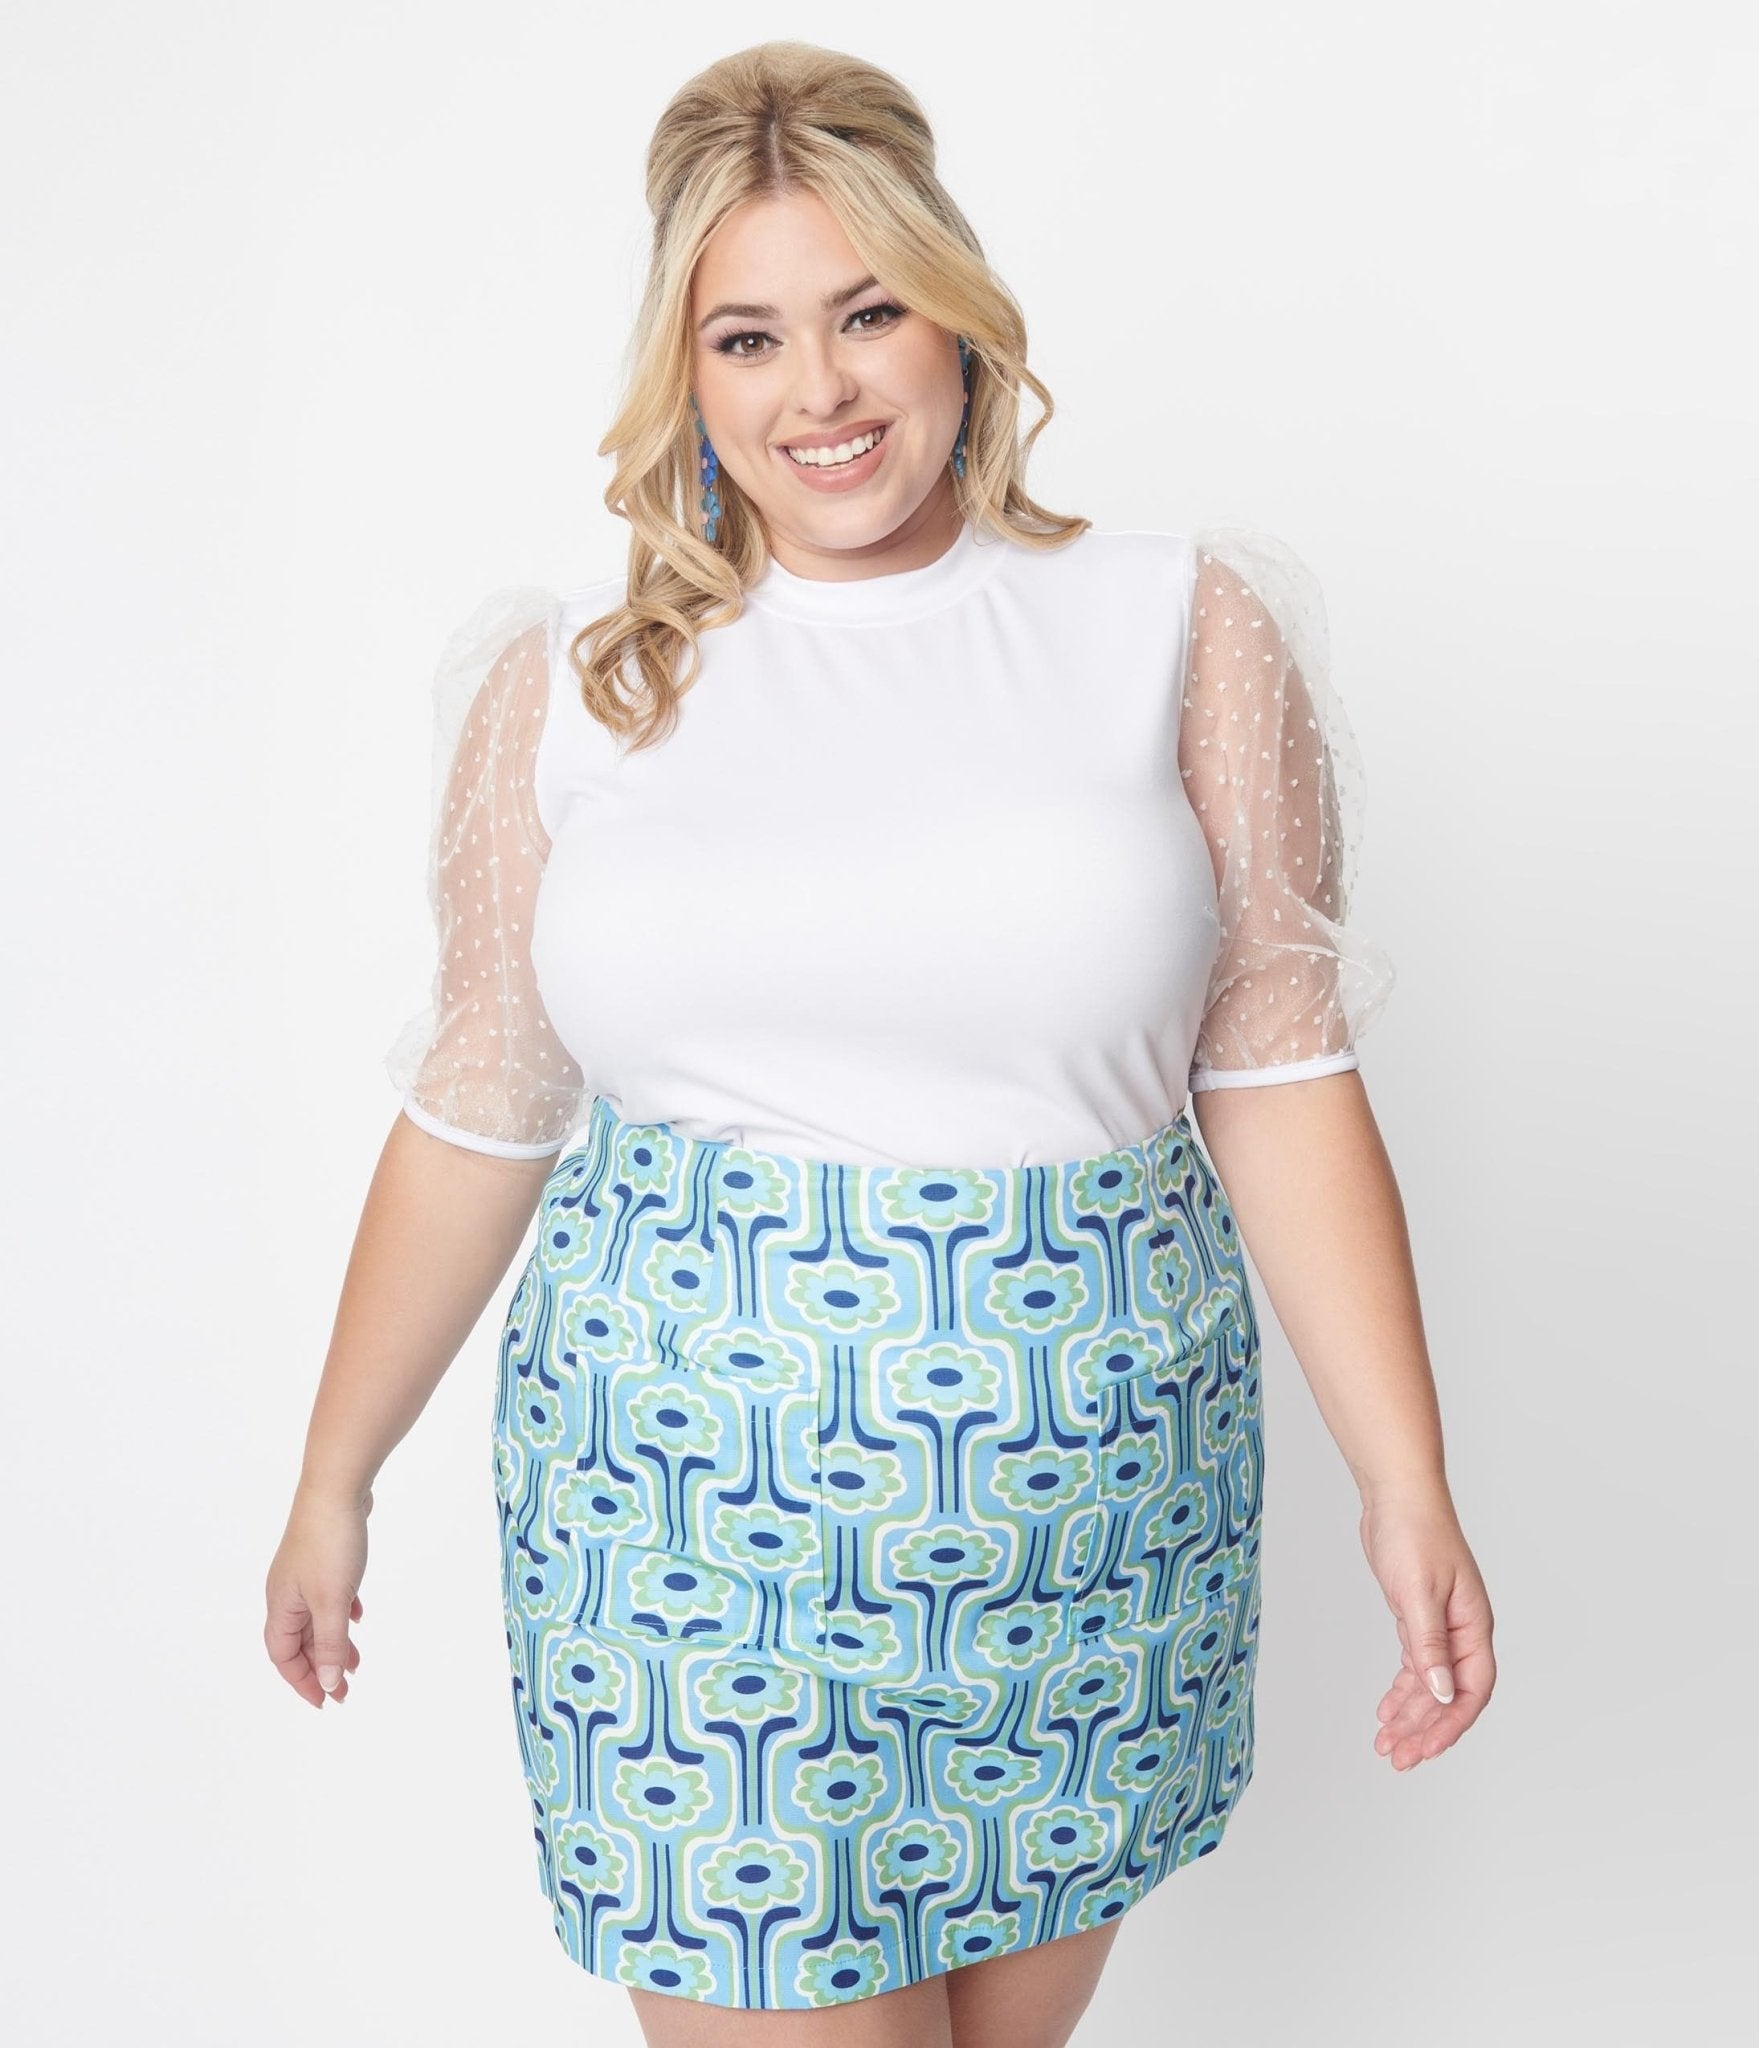 Plus Size White & Clip Dot Balloon Sleeved Top - Unique Vintage - Womens, TOPS, WOVEN TOPS